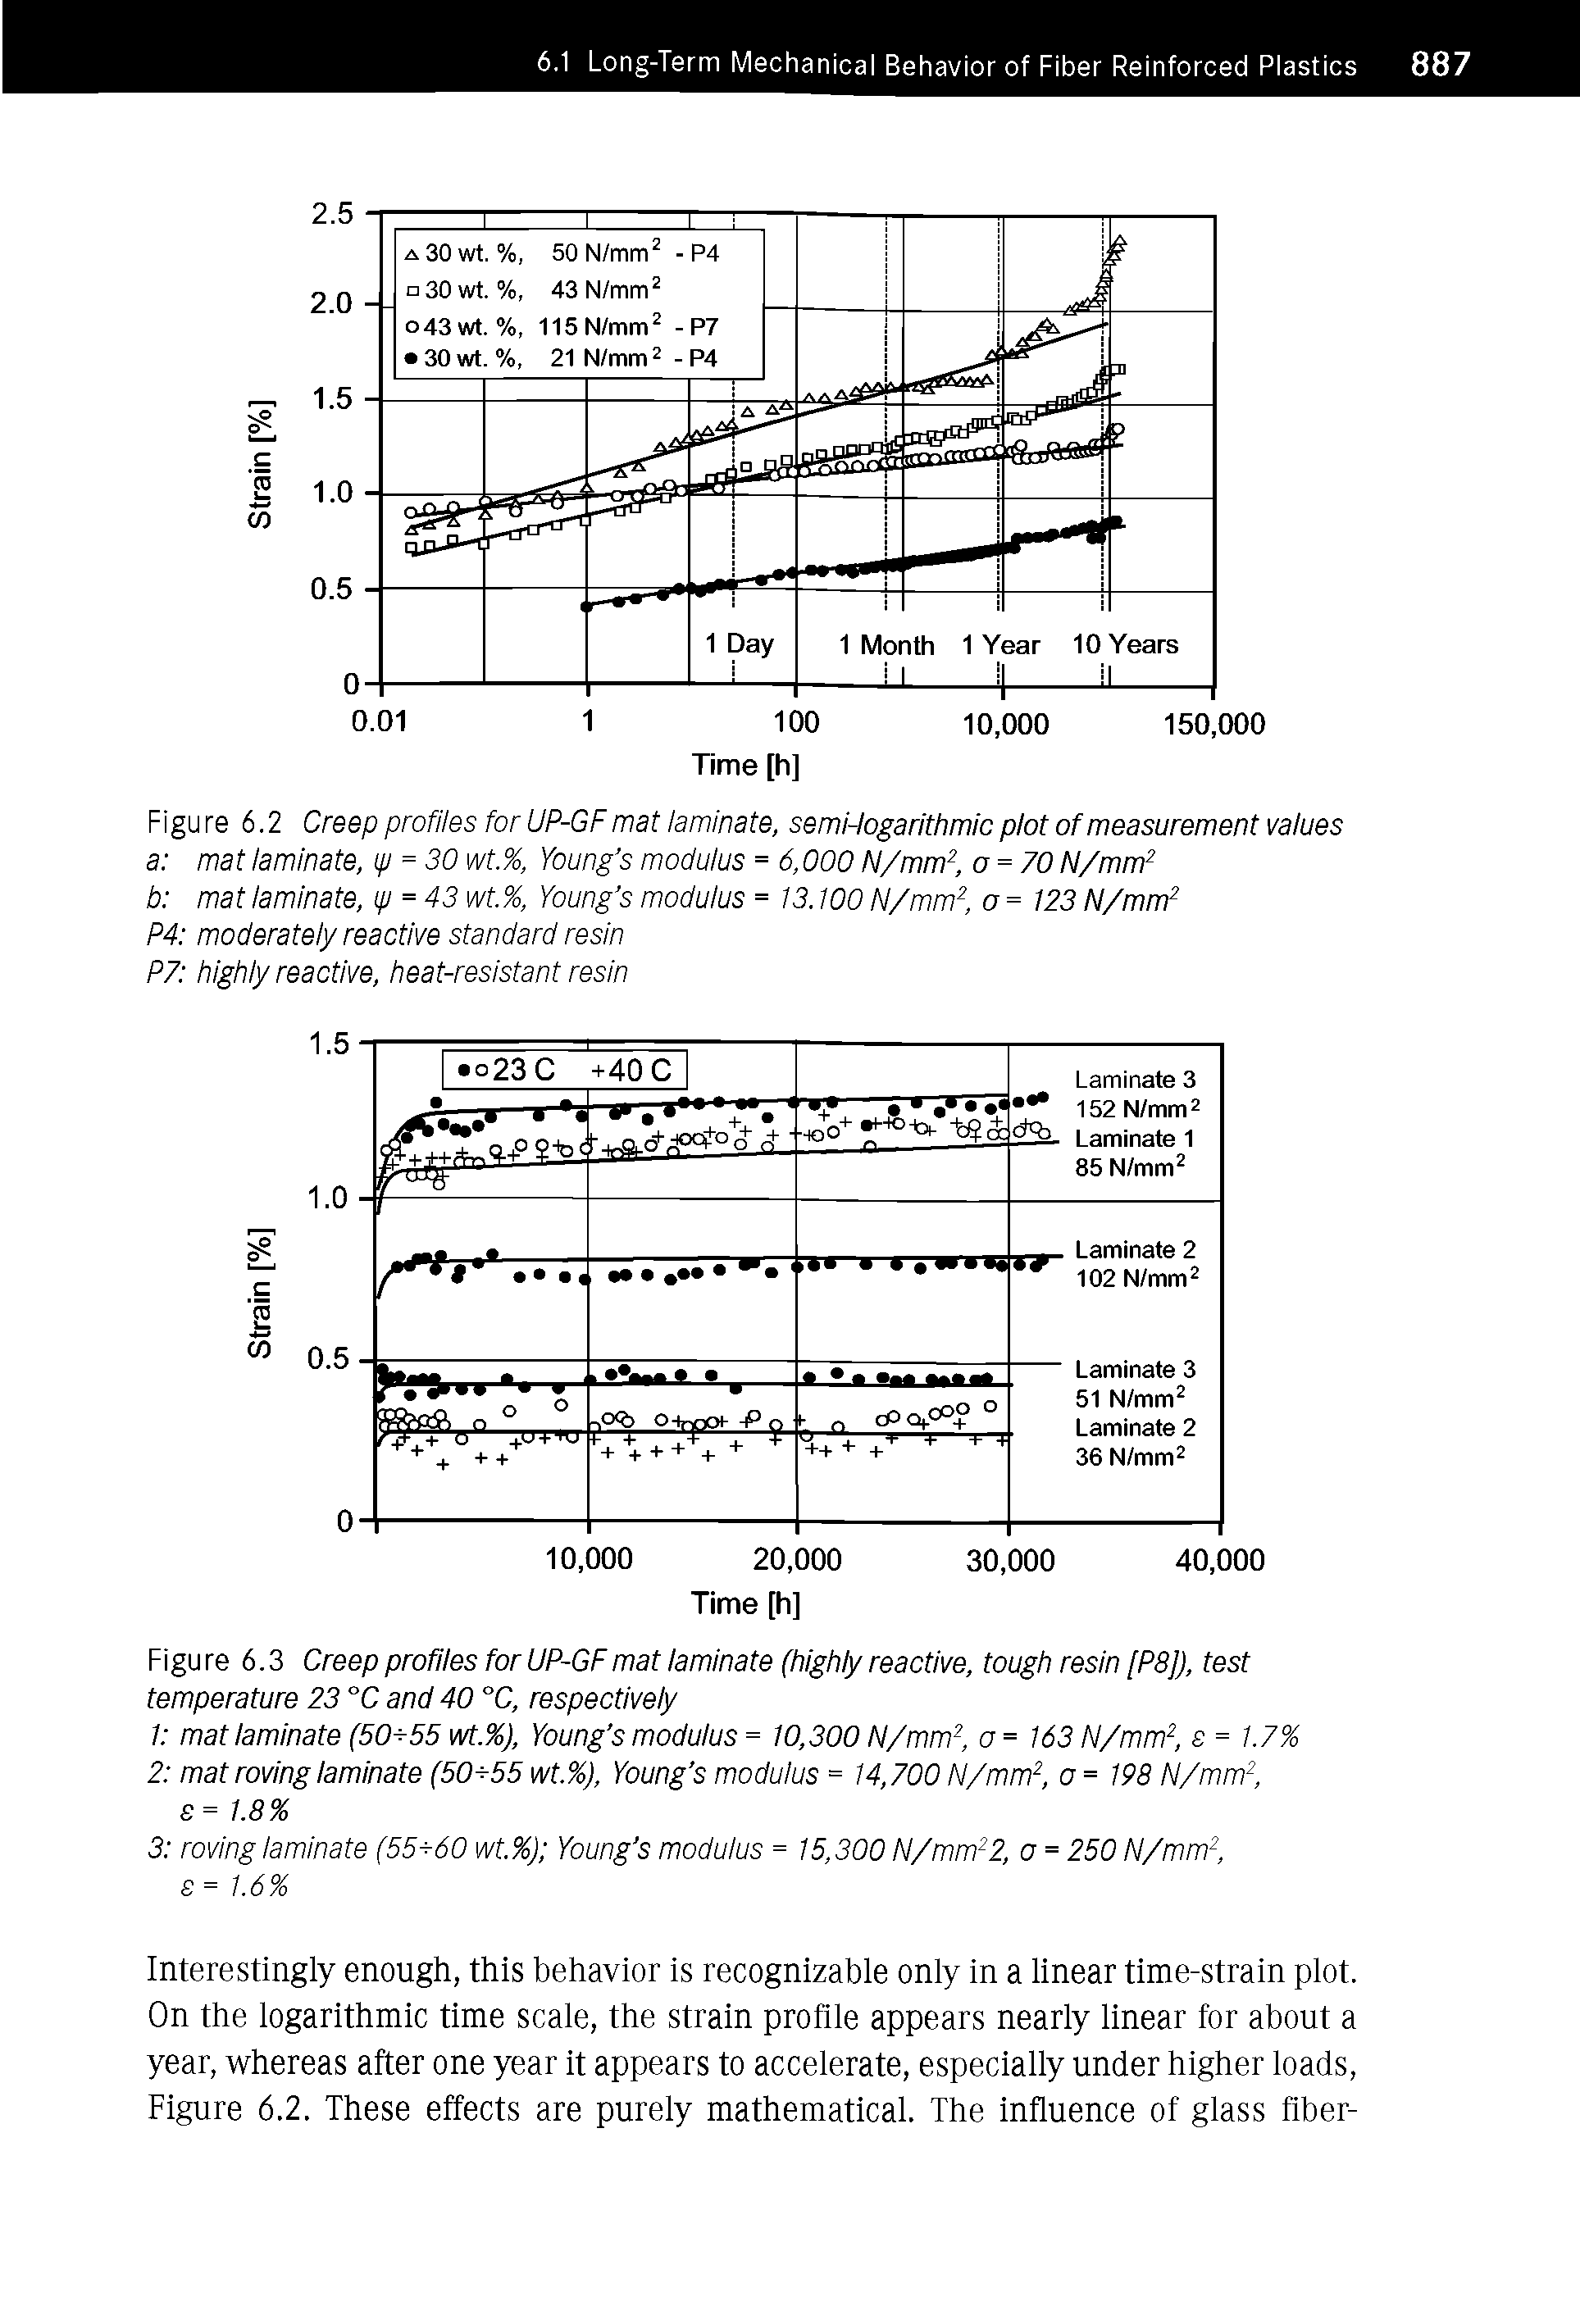 Figure 6.3 Creep profiles for UP-GF mat laminate (highly reactive, tough resin [P8]), test temperature 23 °C and 40 °C, respectively...